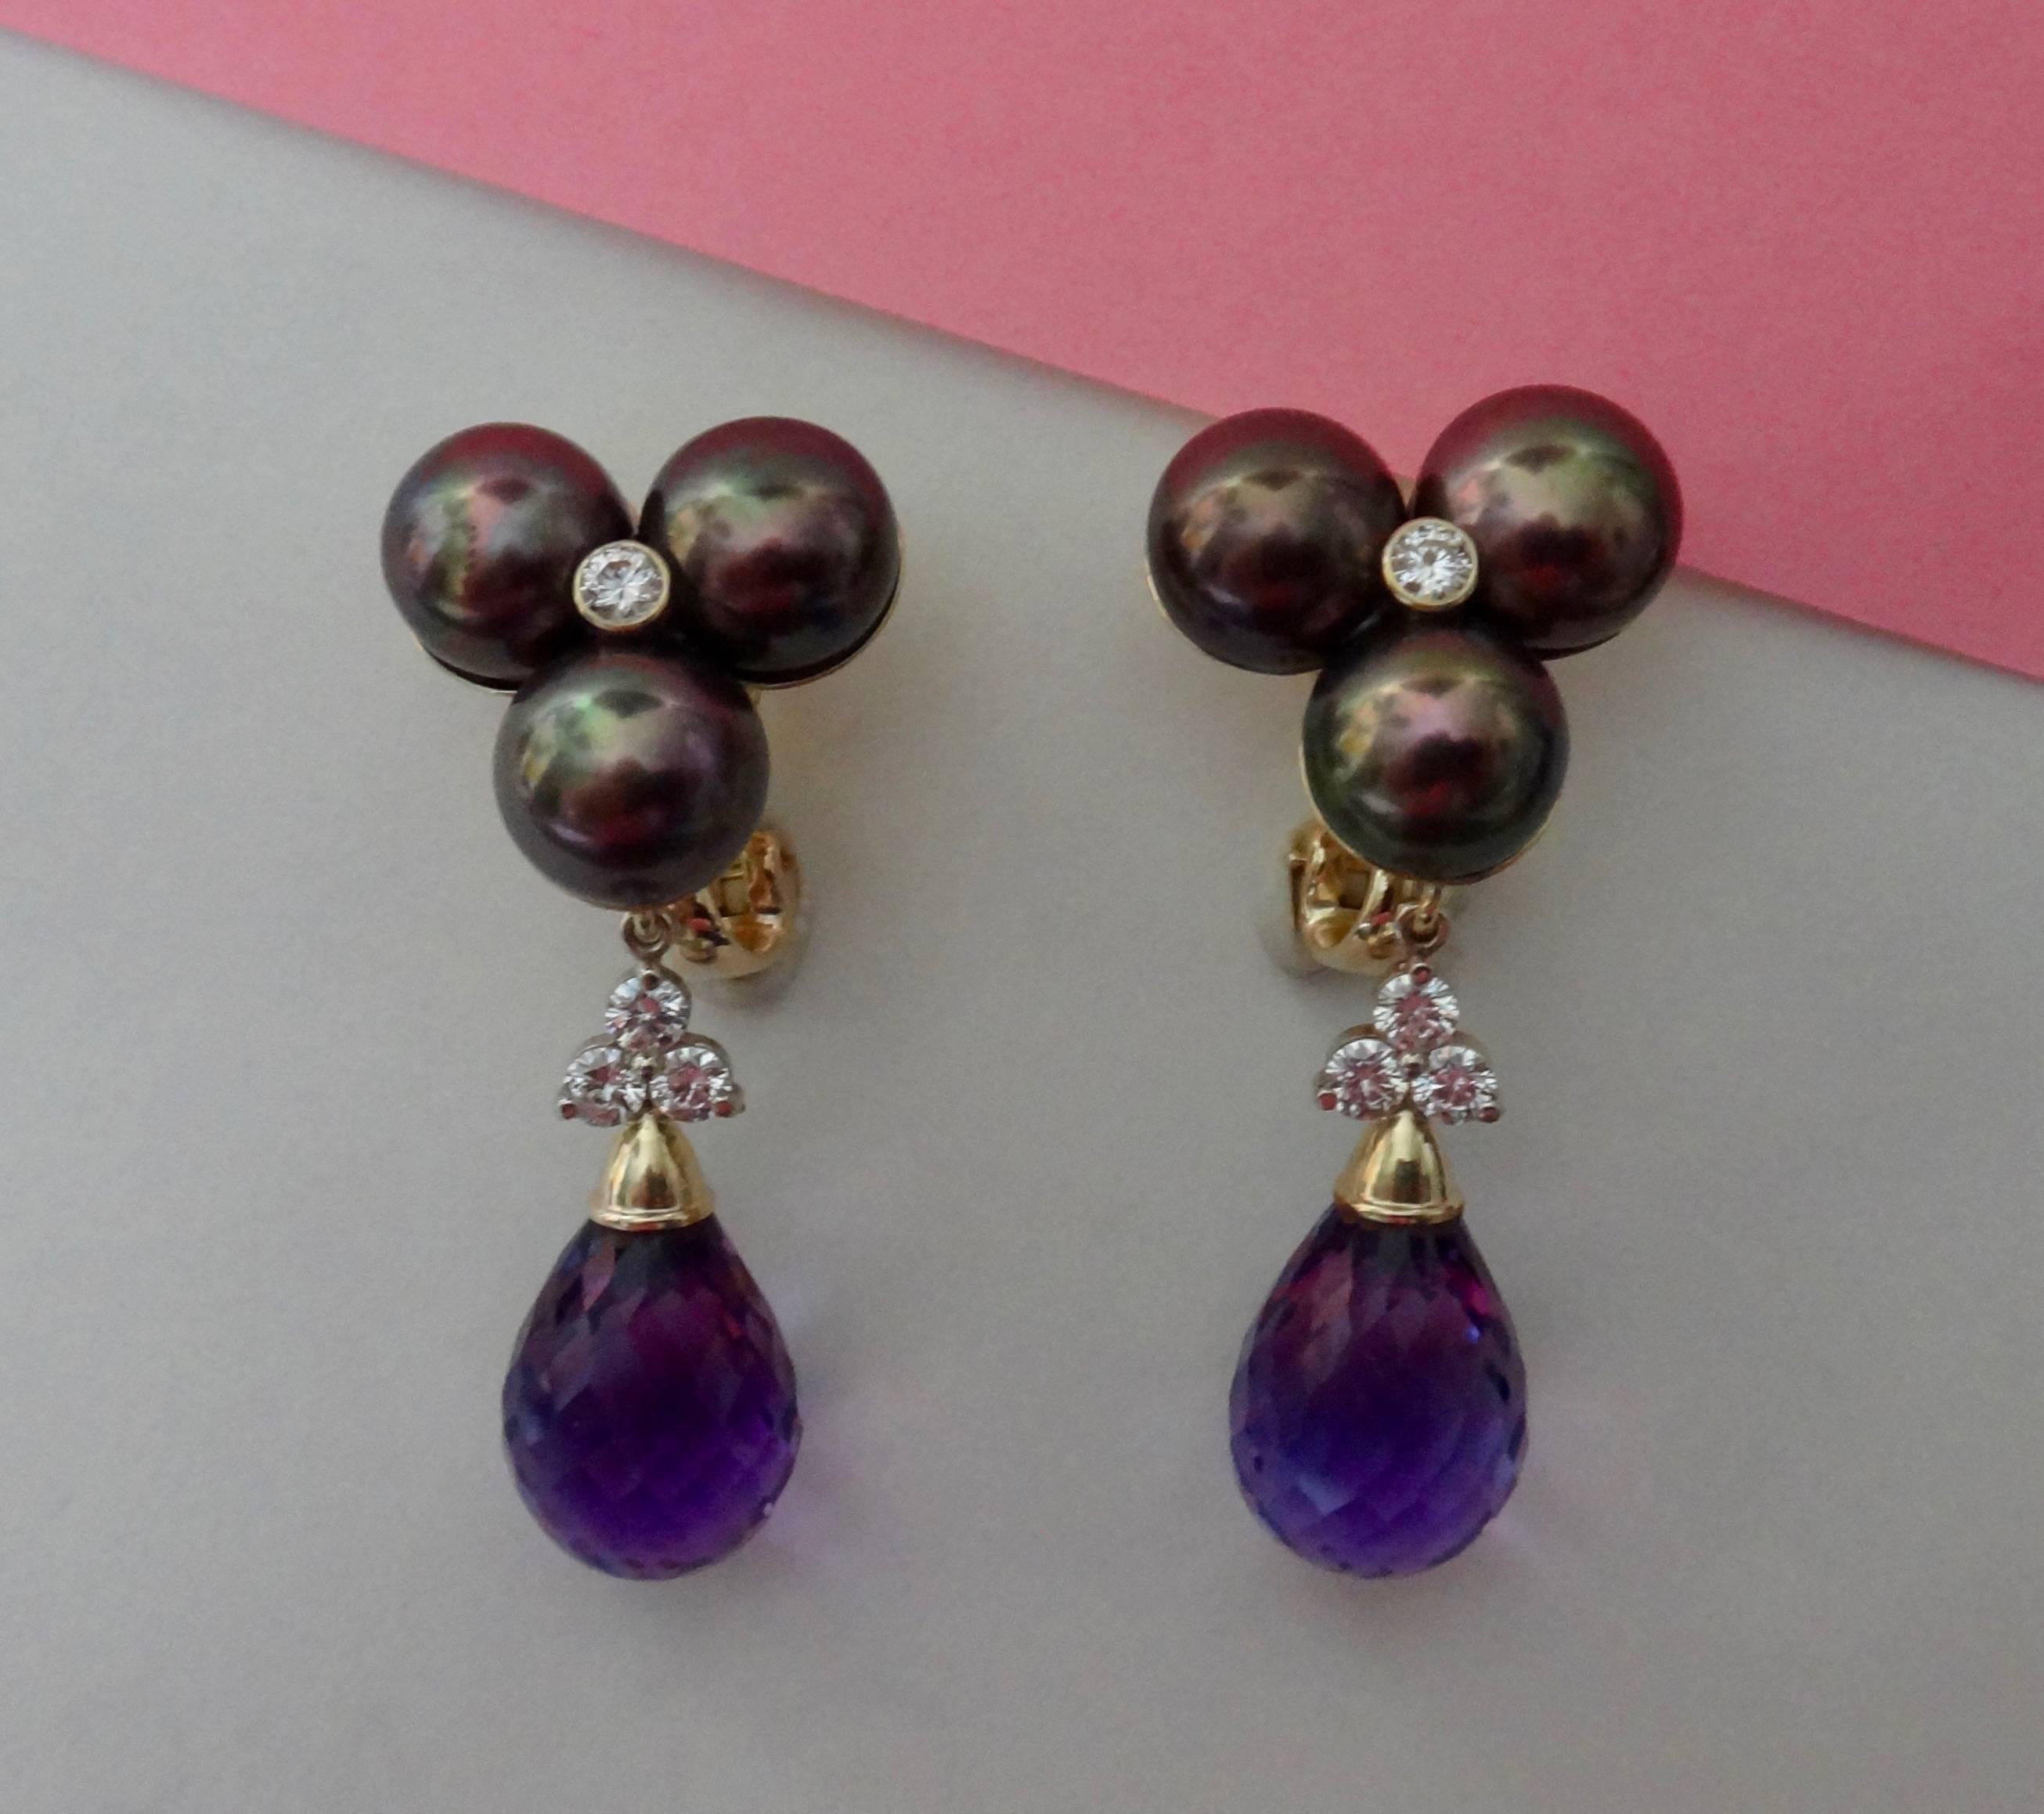 Black button pearls with pink and purple undertones are clustered together and embellished with bezel set, brilliant cut white diamonds.  Suspended from the earrings are a diamond decorated pair of perfectly matched amethyst briolette which are